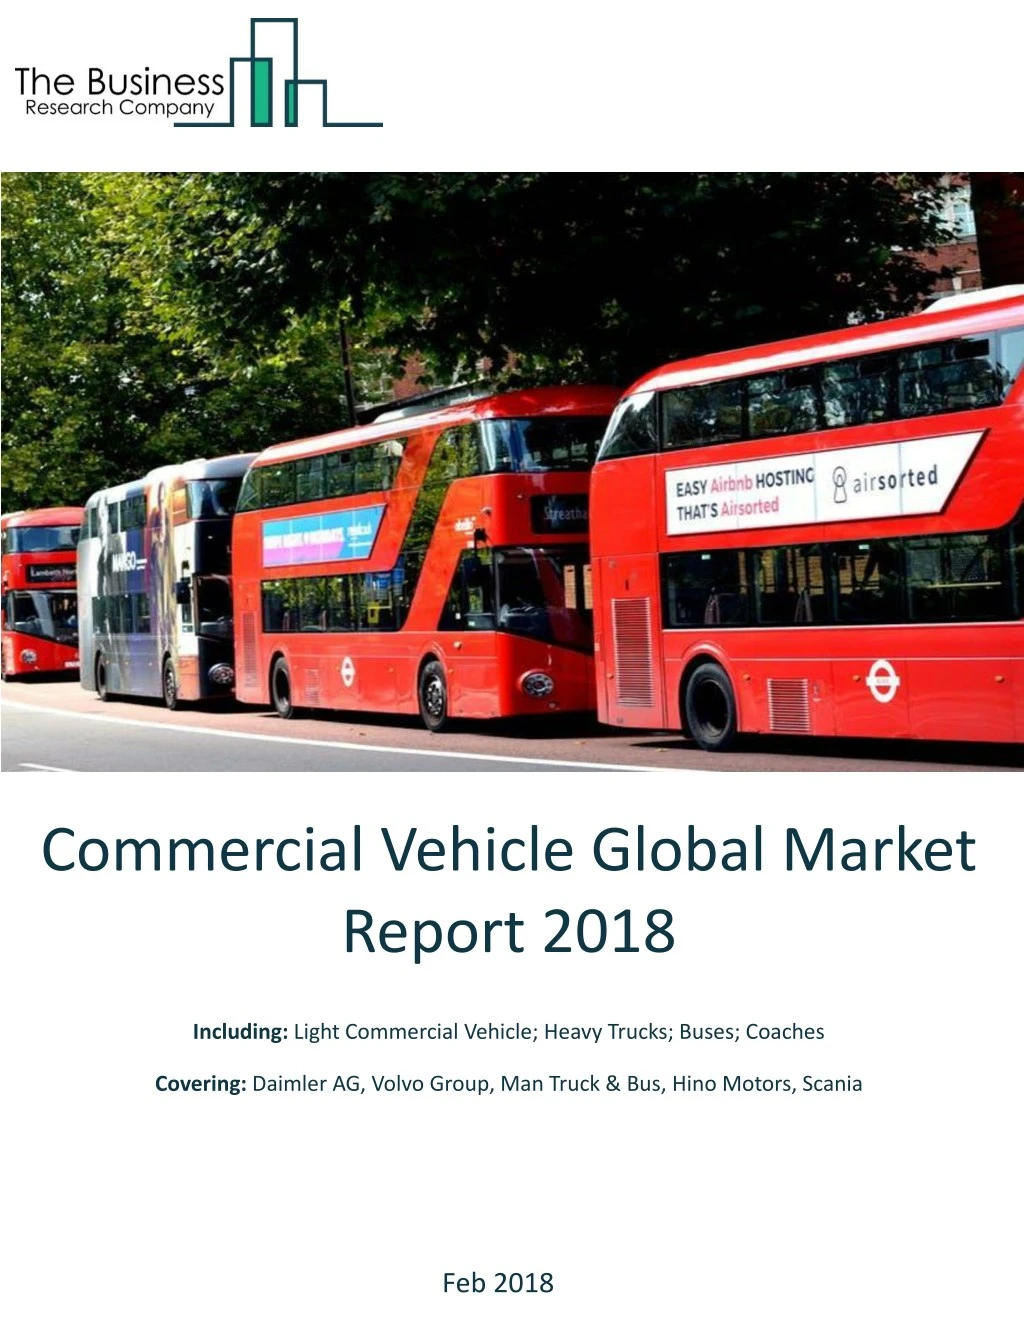 commercial vehicle global market report 2018